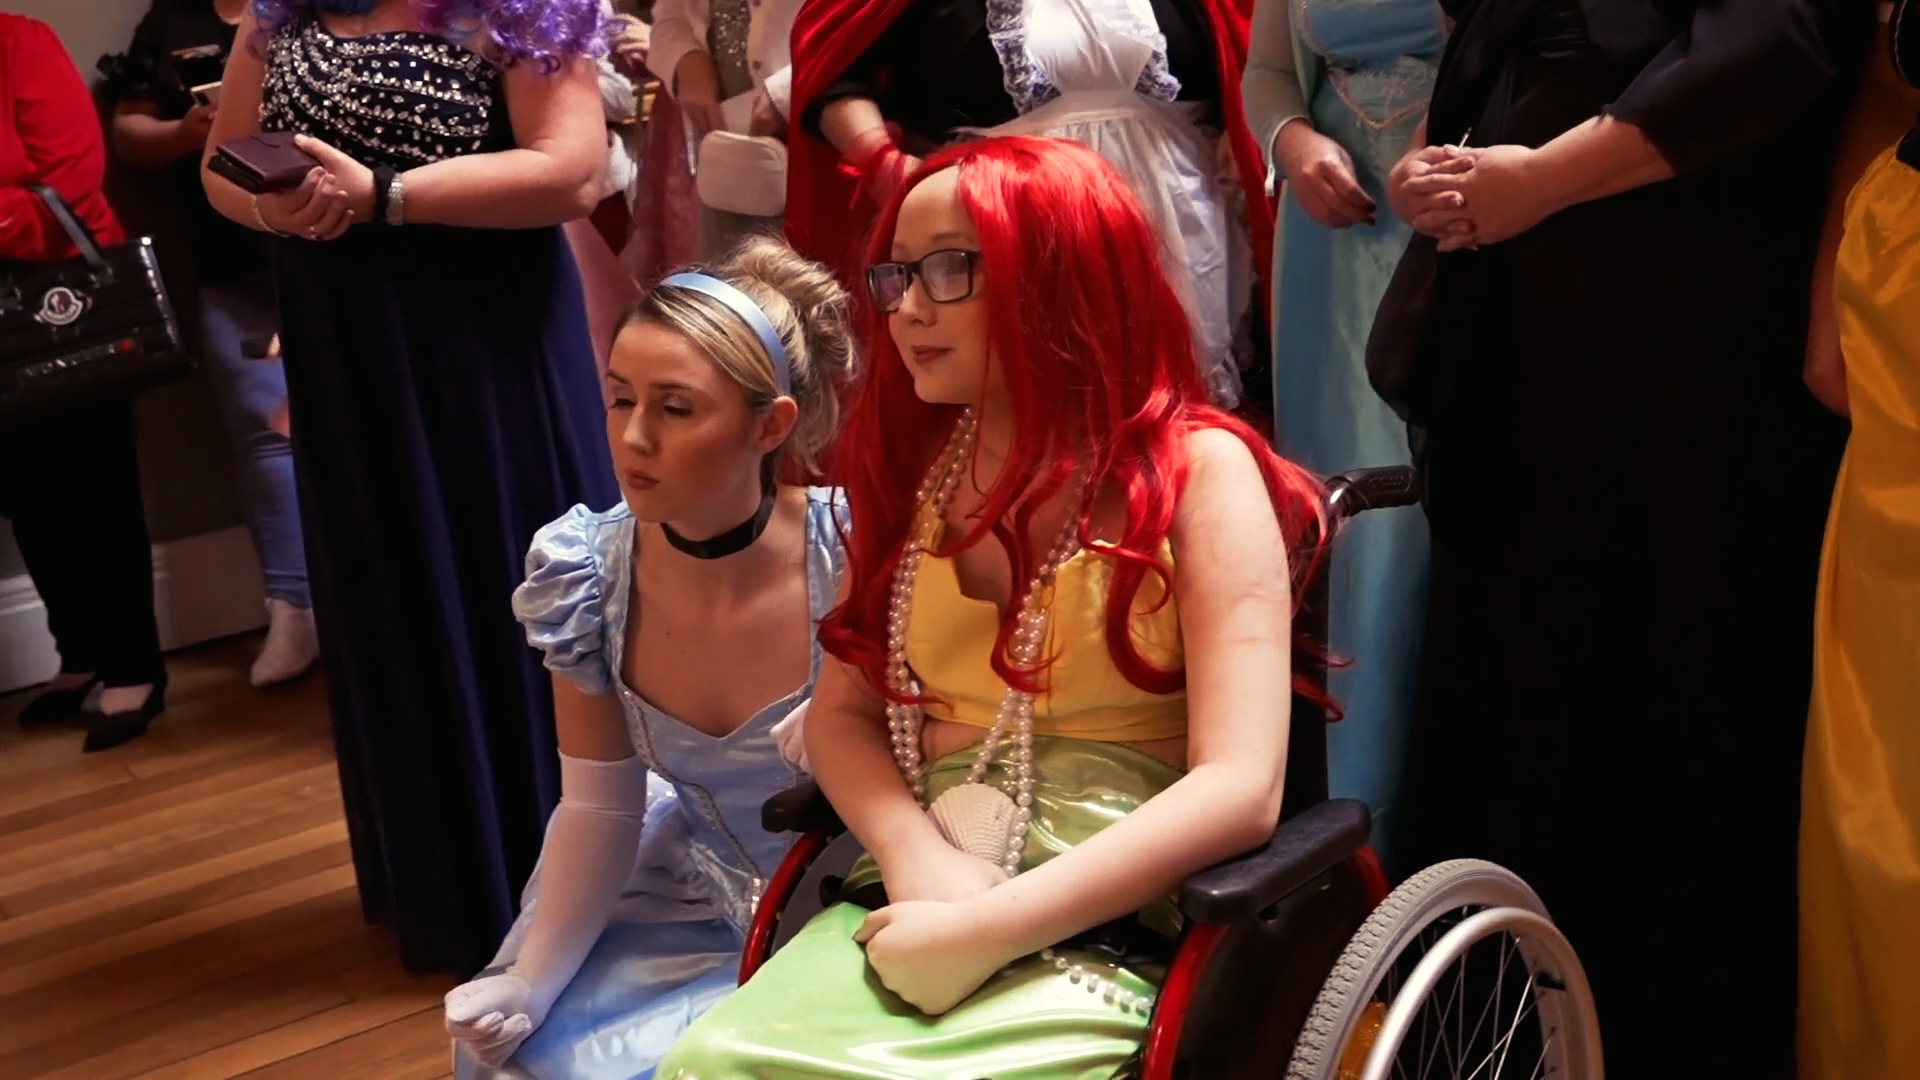 Jacob Perkins, dressed as Ariel, alongside Cinderella at his Make-A-Wish party